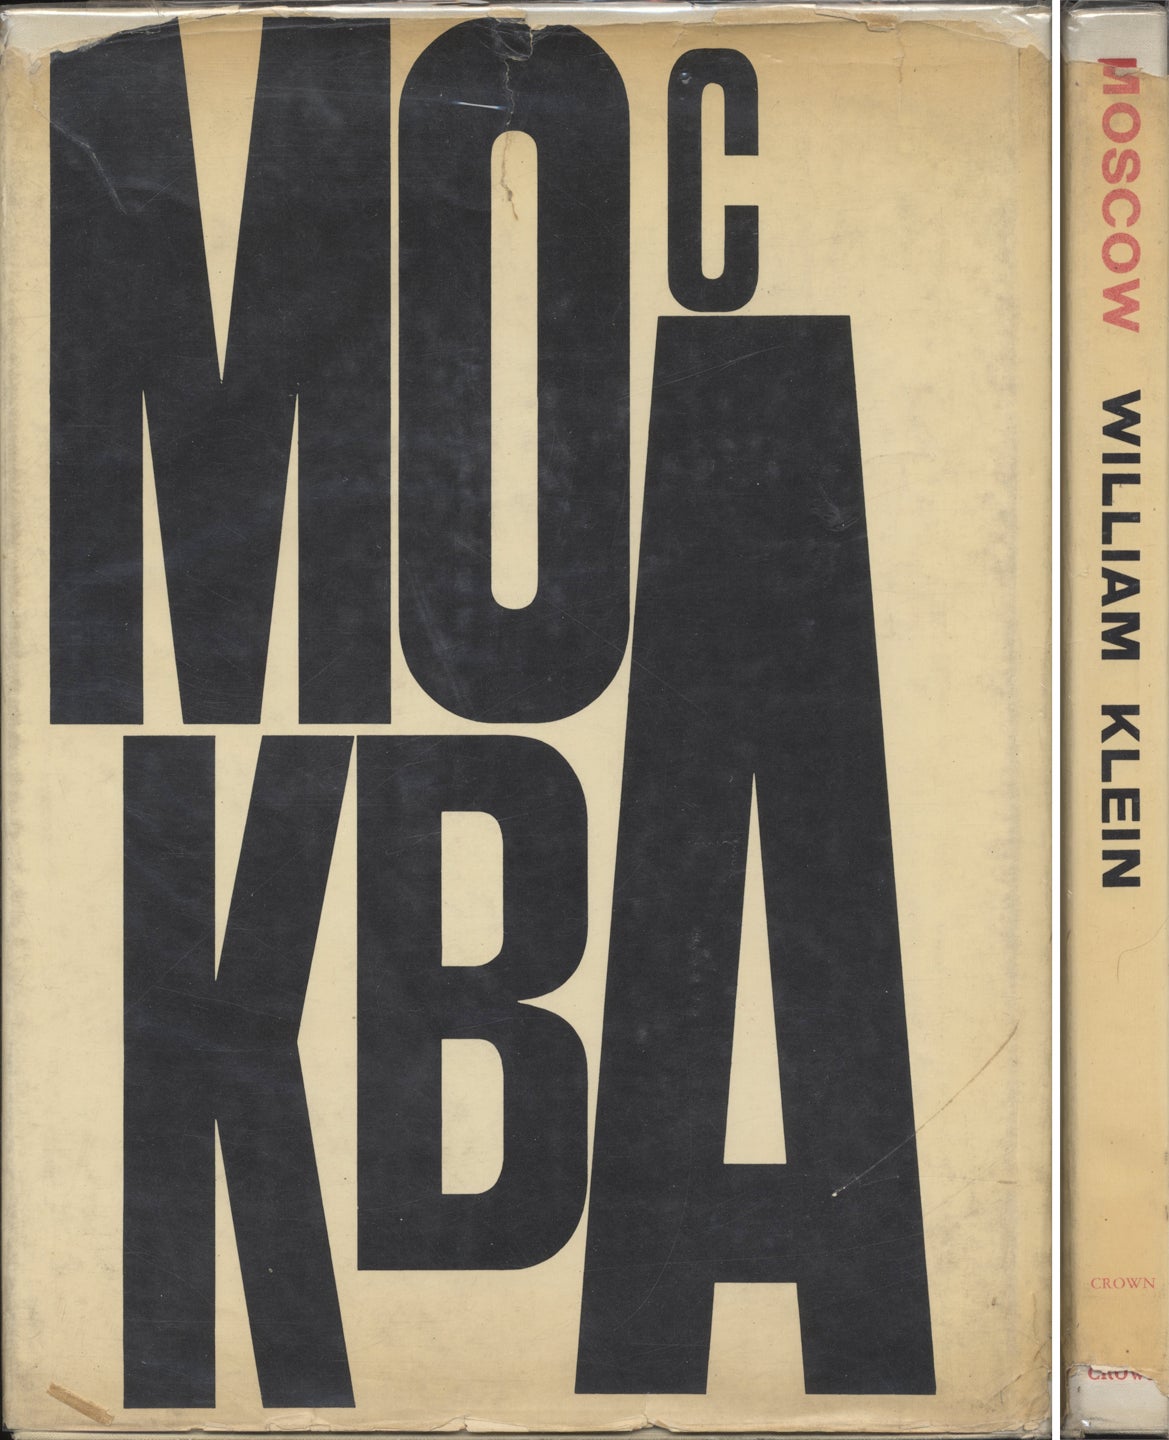 William Klein: Moscow / Mockba (First English Edition) [SIGNED]